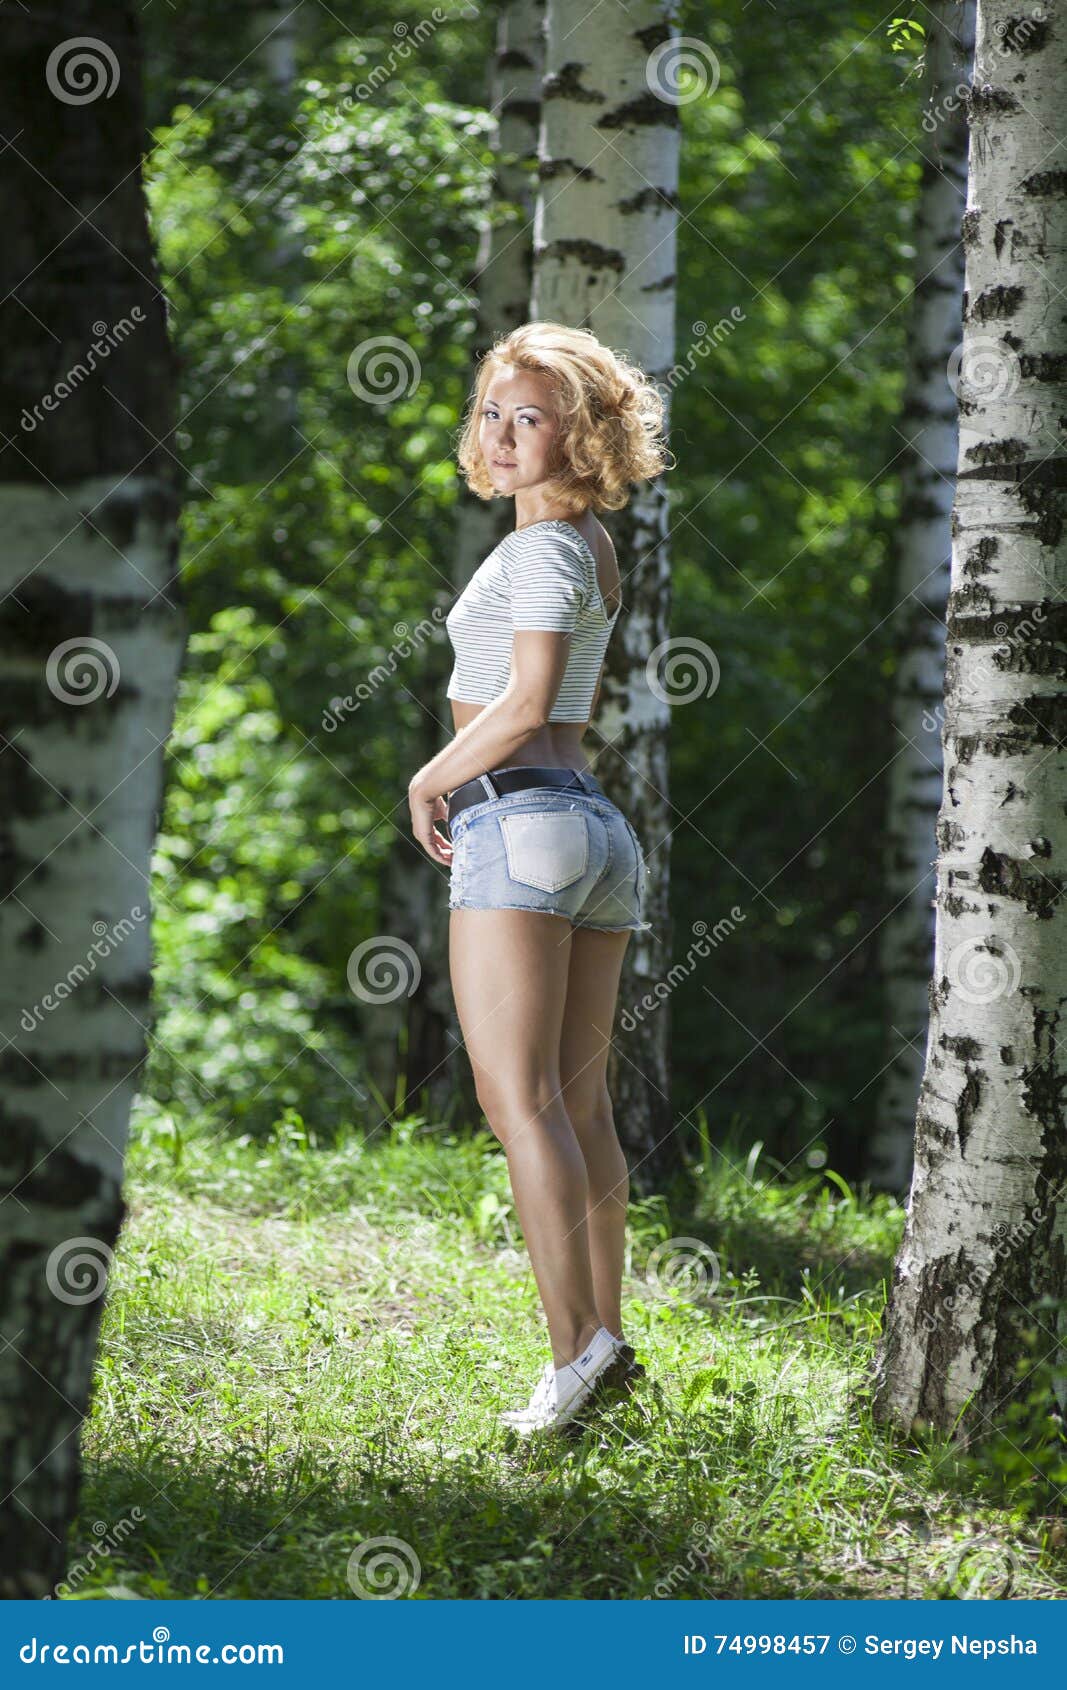 Posing in the wood stock image. Image of body, clothing - 74998457